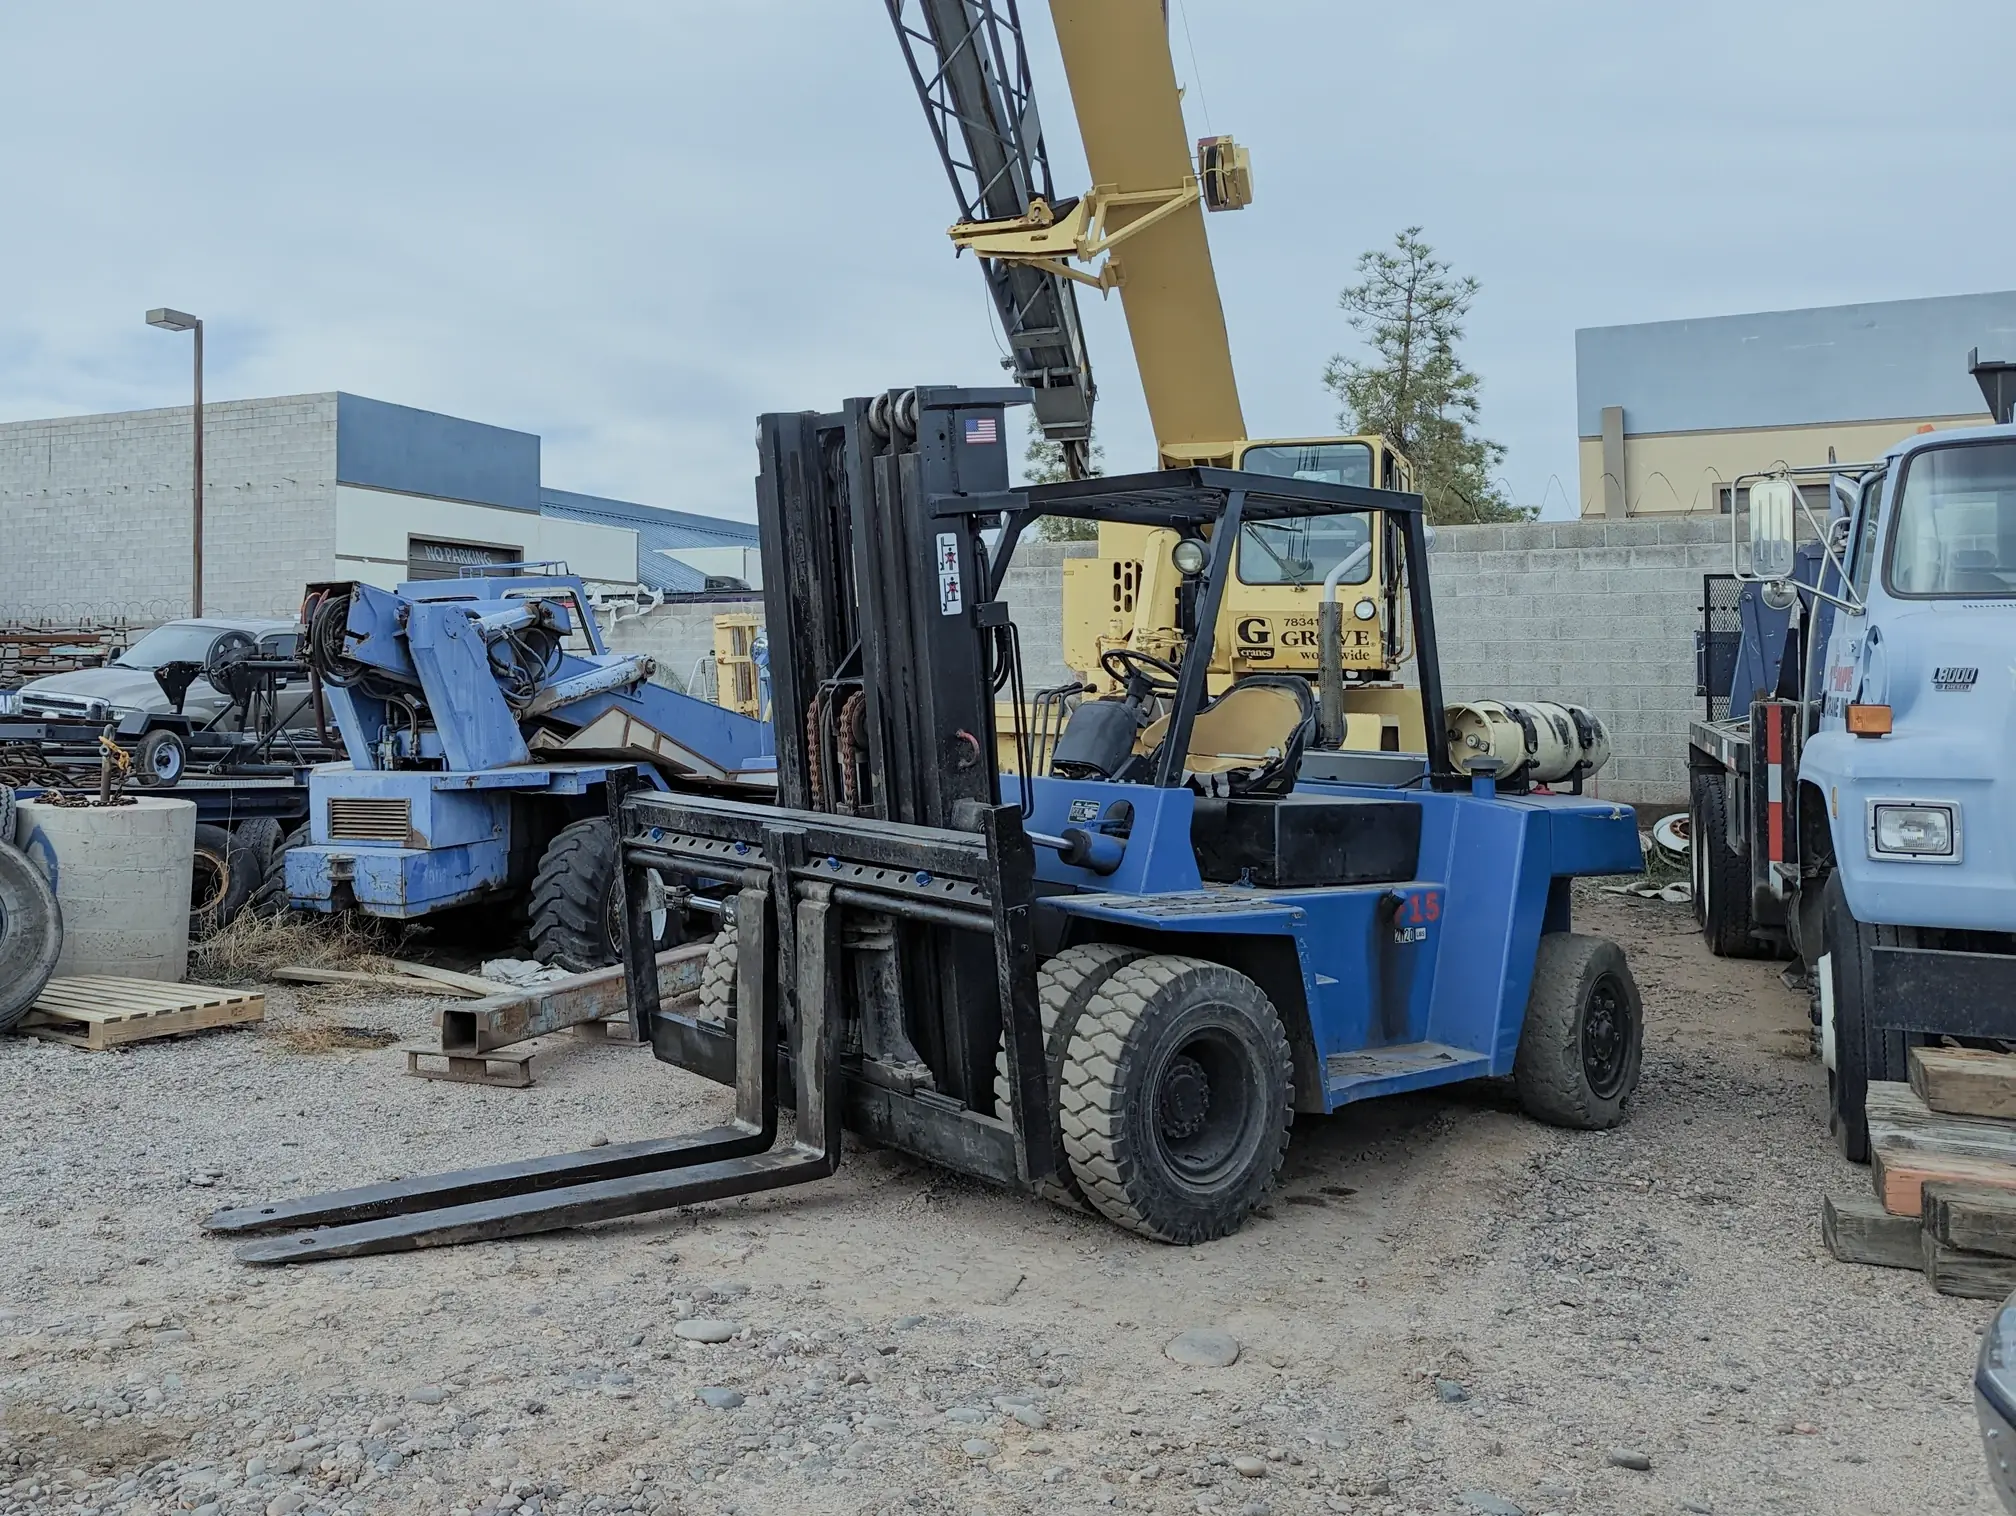 A forklift parked in the yard, amid a variety of equipment, showcasing its fundamental role in operations.